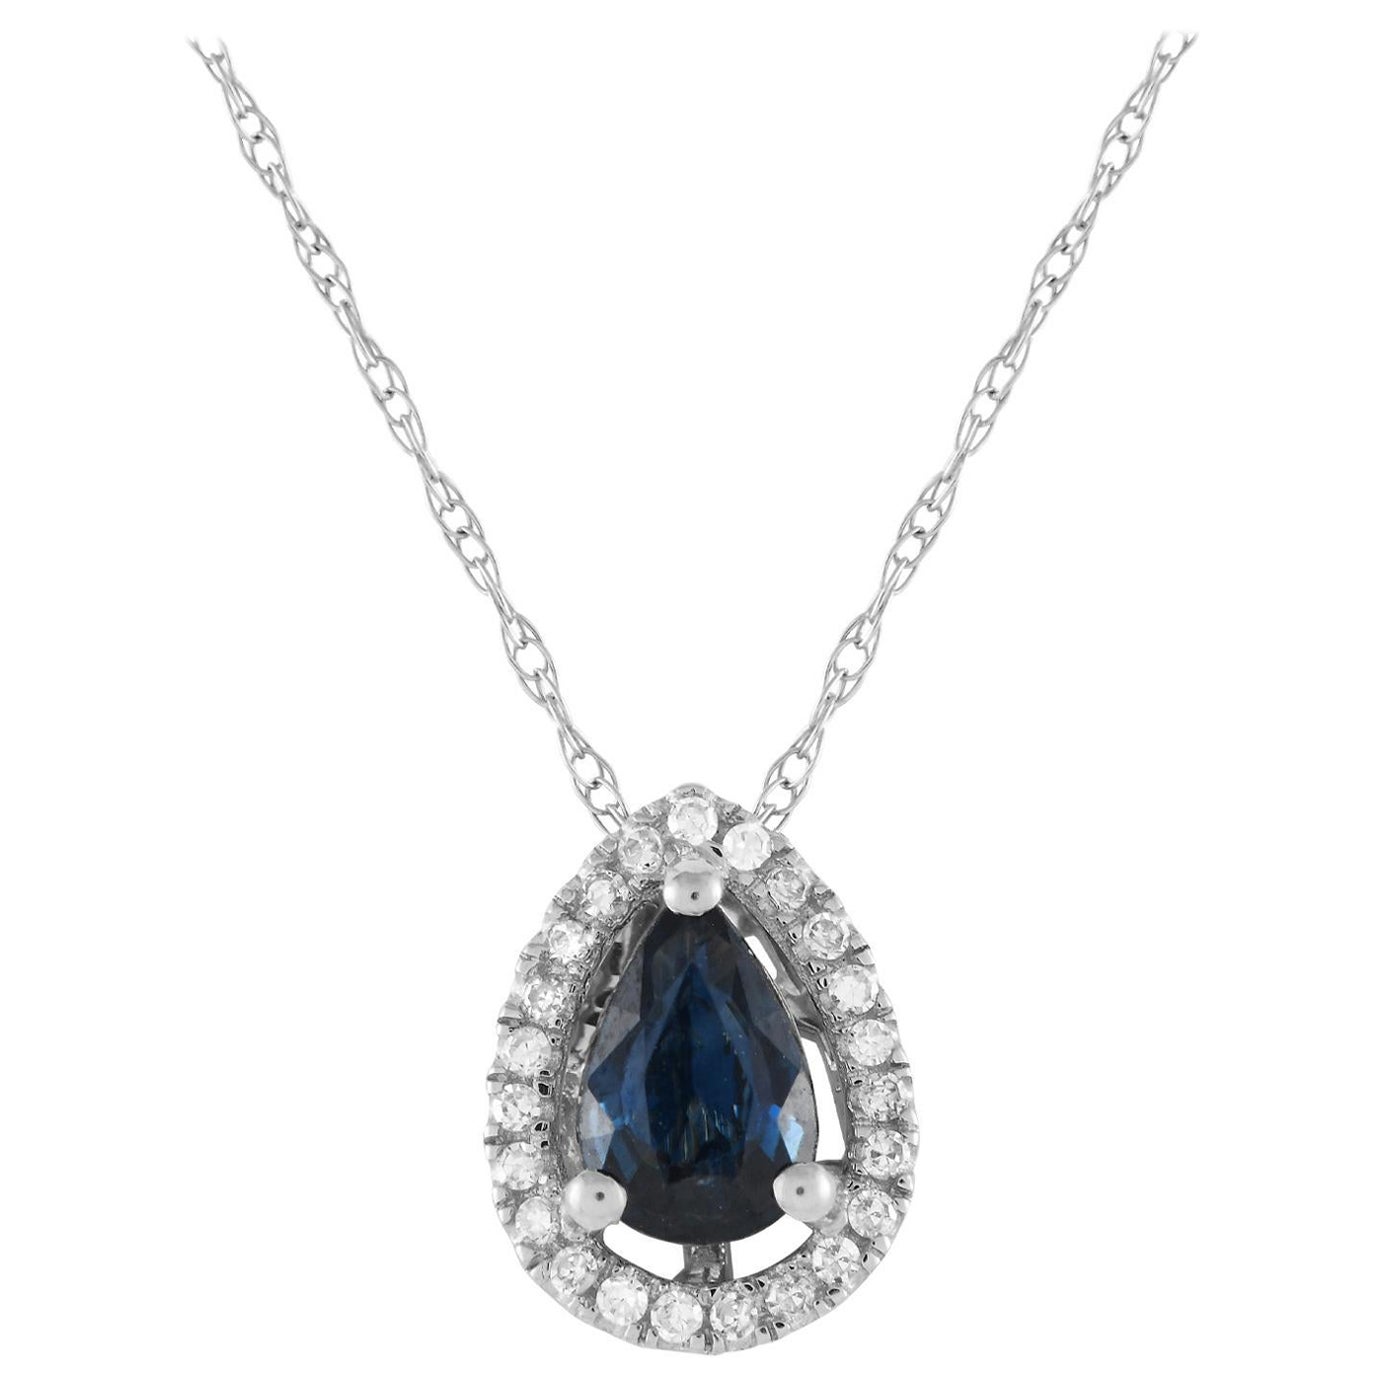 LB Exclusive 14K White Gold 0.07ct Diamond & Sapphire Pear Necklace PD4-15949WSA For Sale